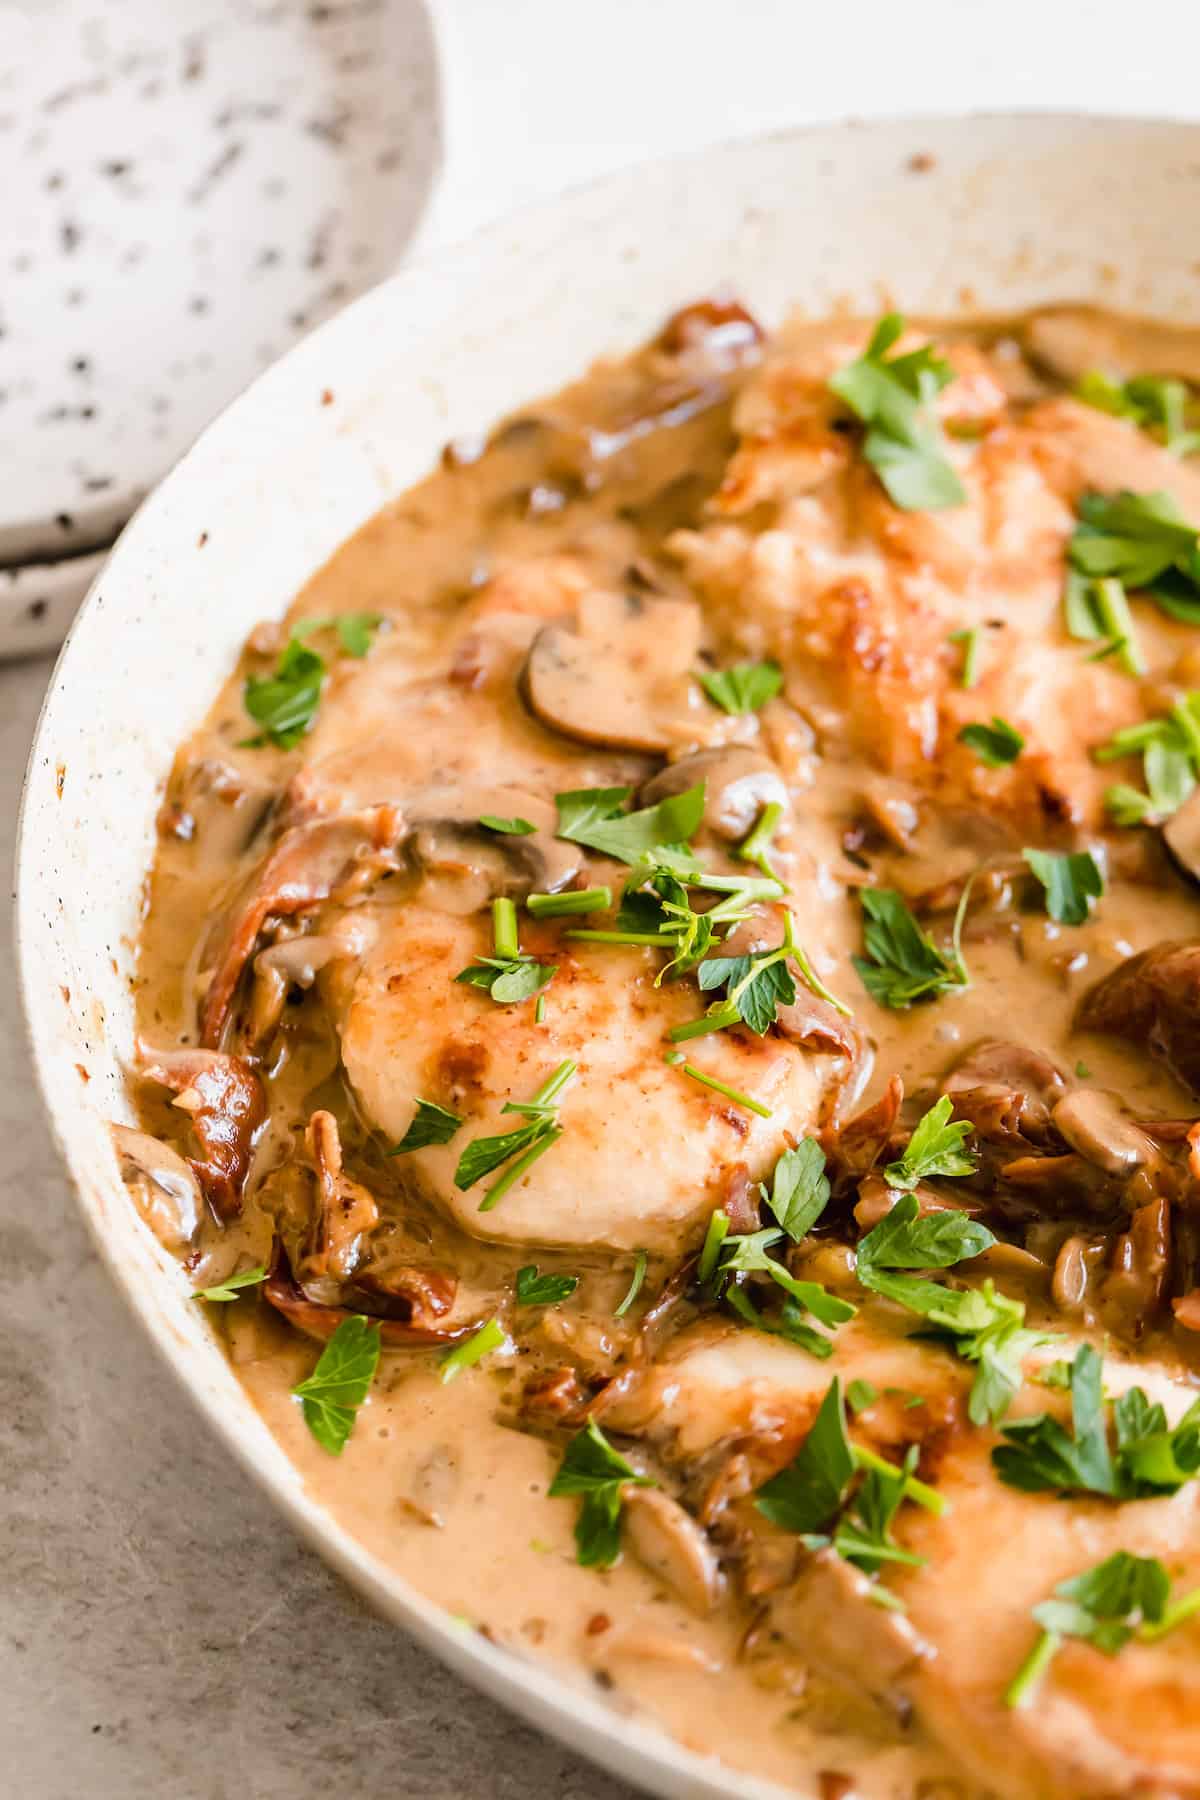 Creamy chicken marsala in a white bowl sprinkled with herbs.